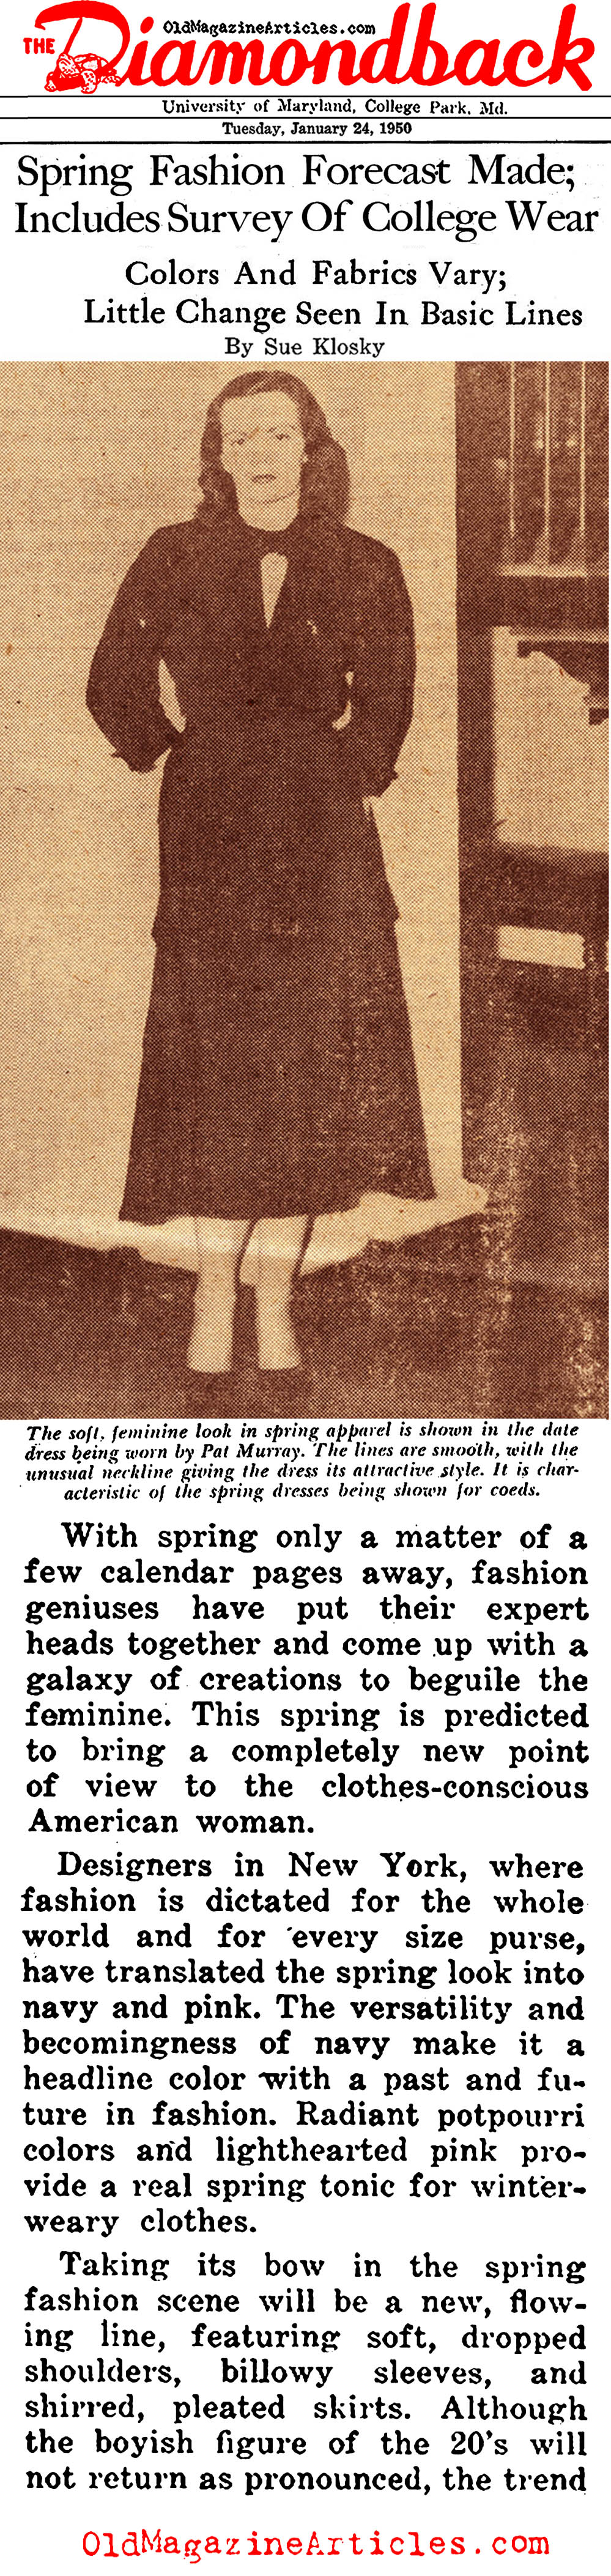 The College Fashion Forecast for the Spring of 1950 (The Diamondback, 1950)